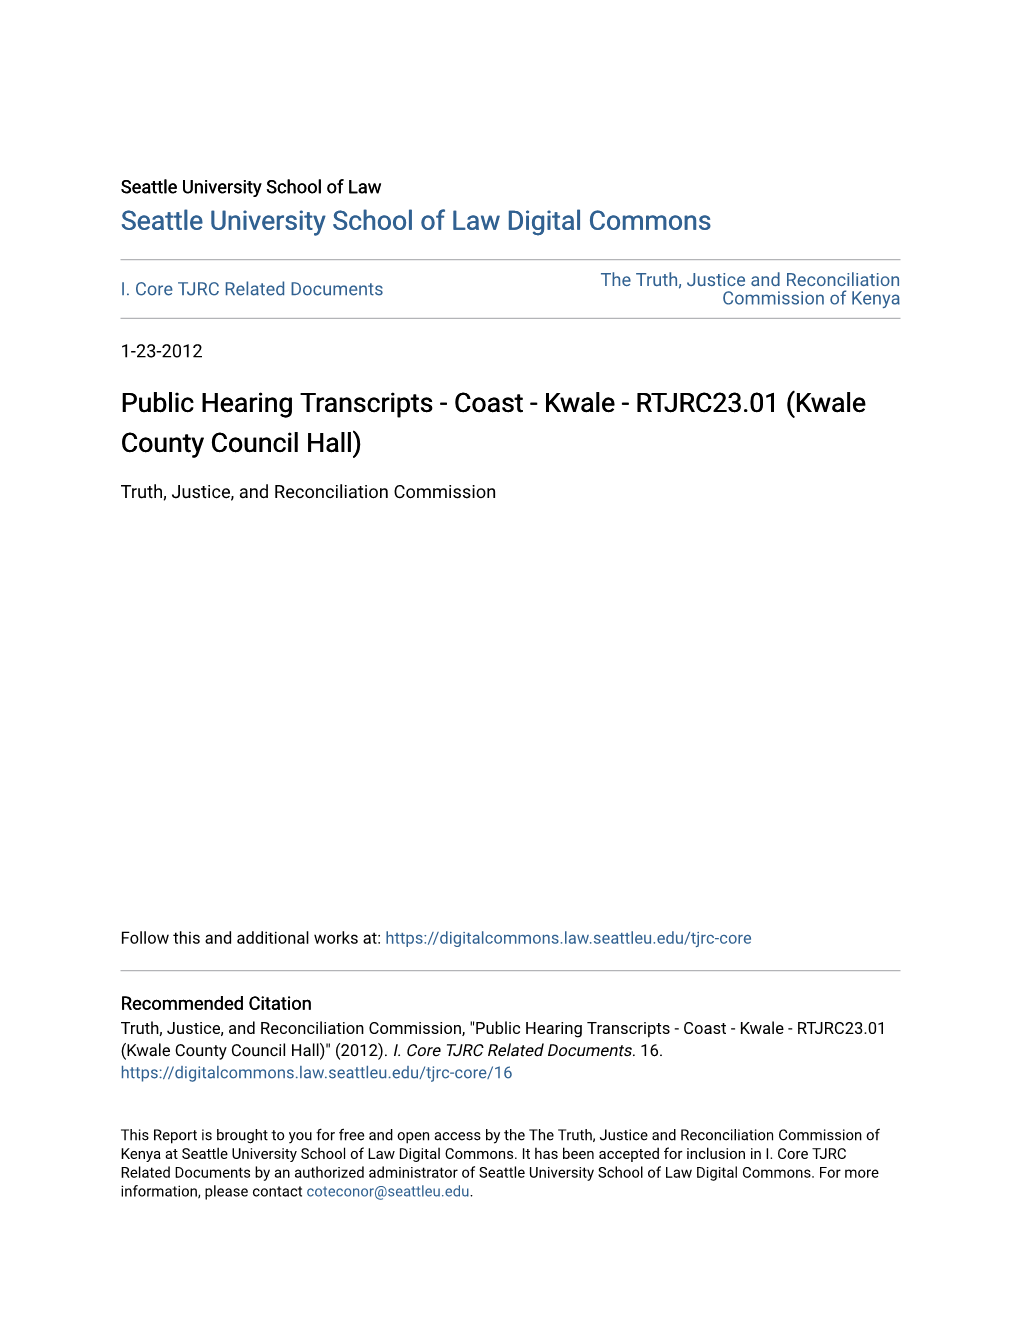 Public Hearing Transcripts - Coast - Kwale - RTJRC23.01 (Kwale County Council Hall)